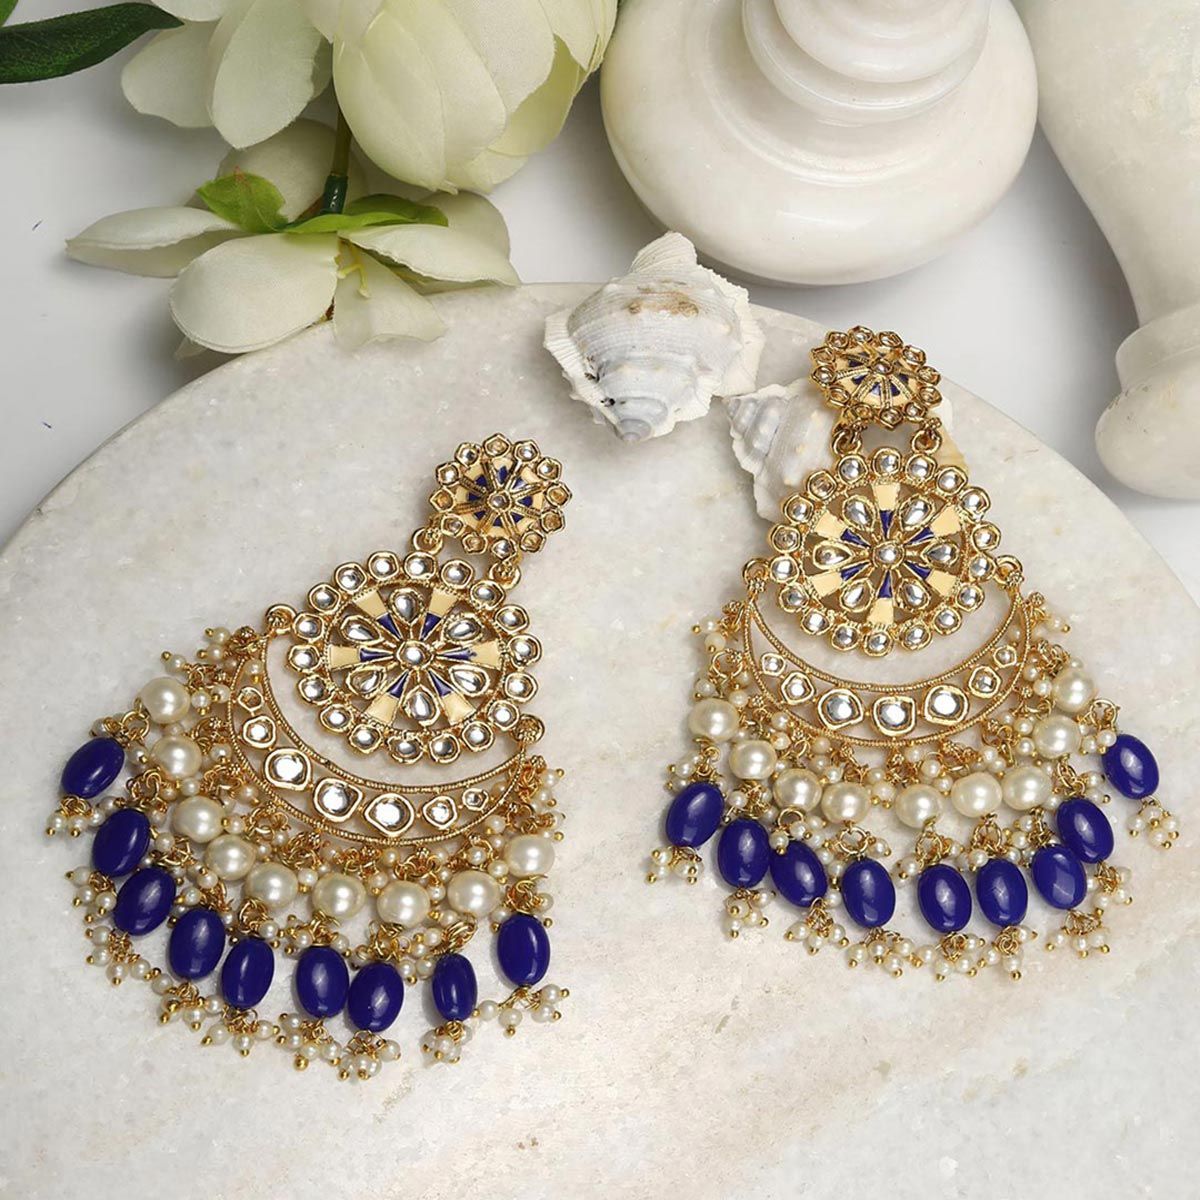 Buy Exclusive Designer Pink And Gold Chandbali Earrings Online Collection  Online From Surat Wholesale Shop.